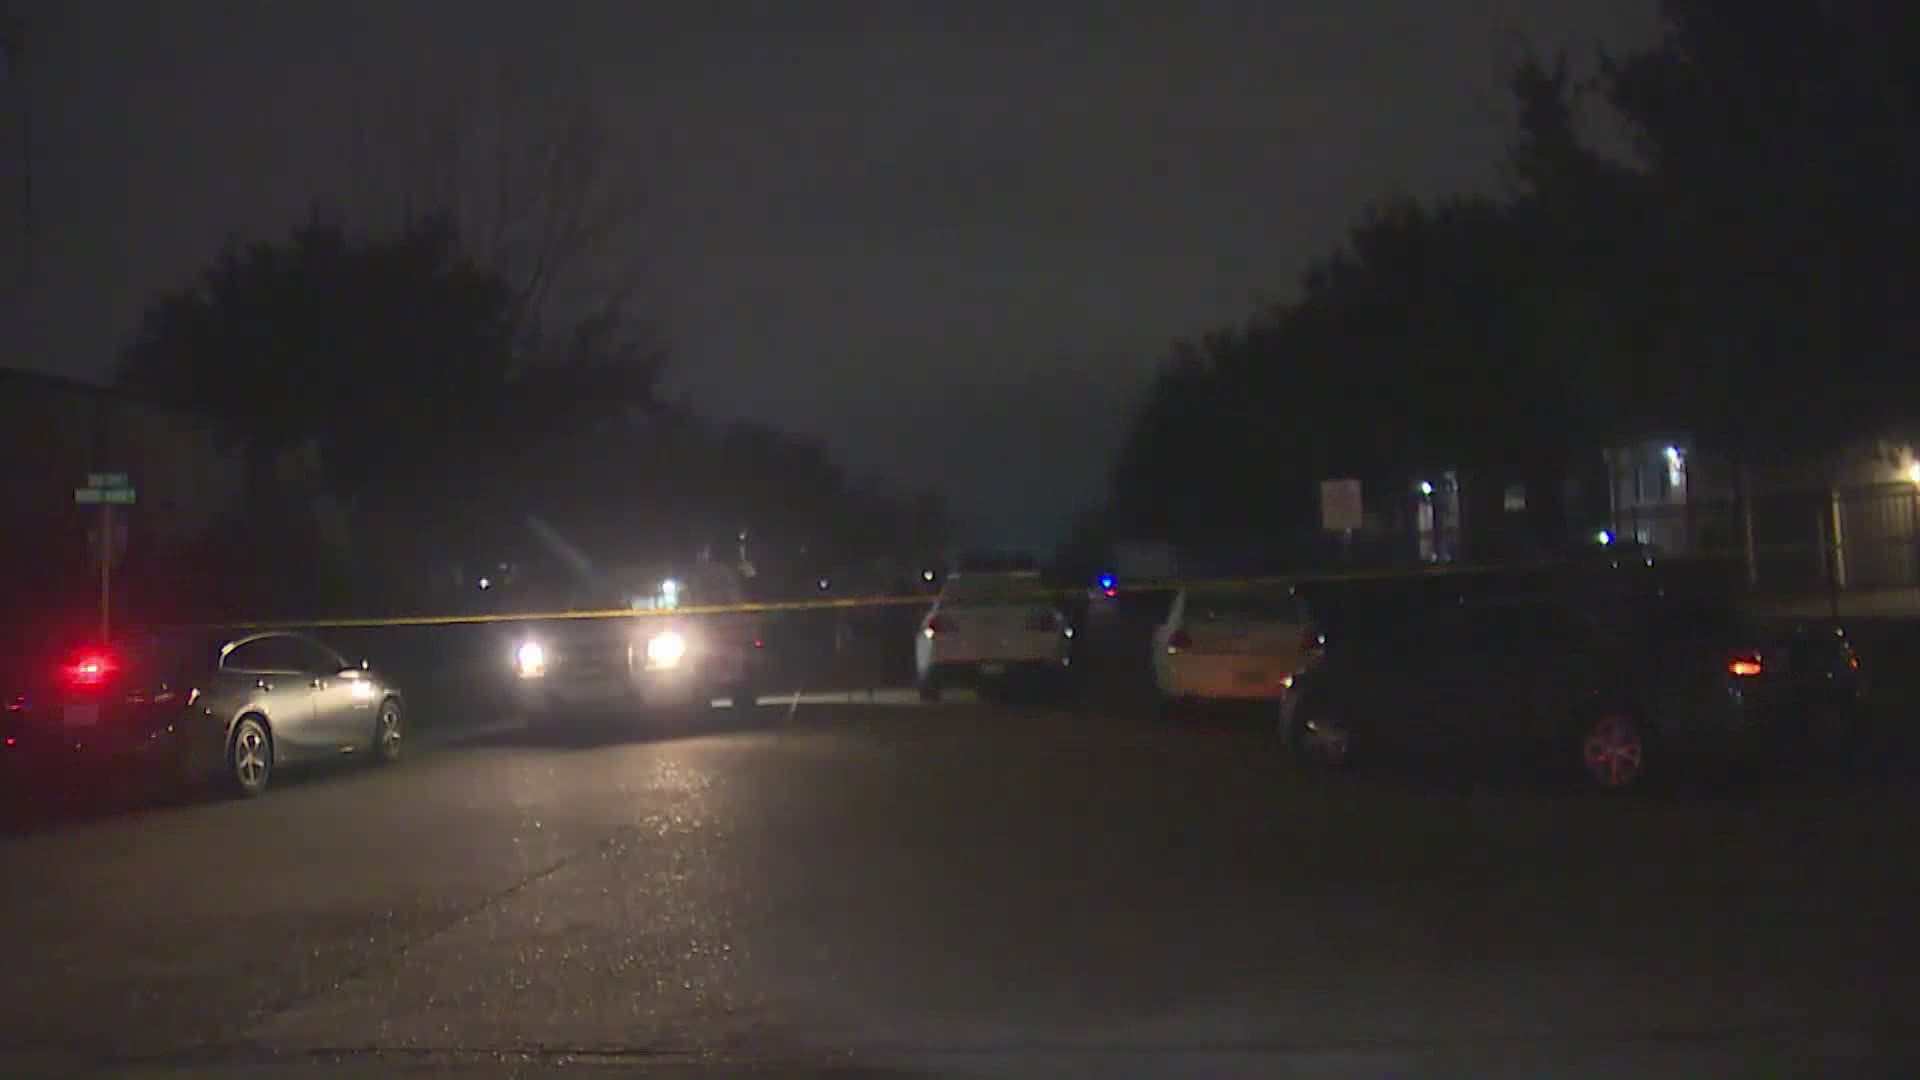 A 9-year-old child was transported by Life Flight after being shot in the Katy area Friday evening.